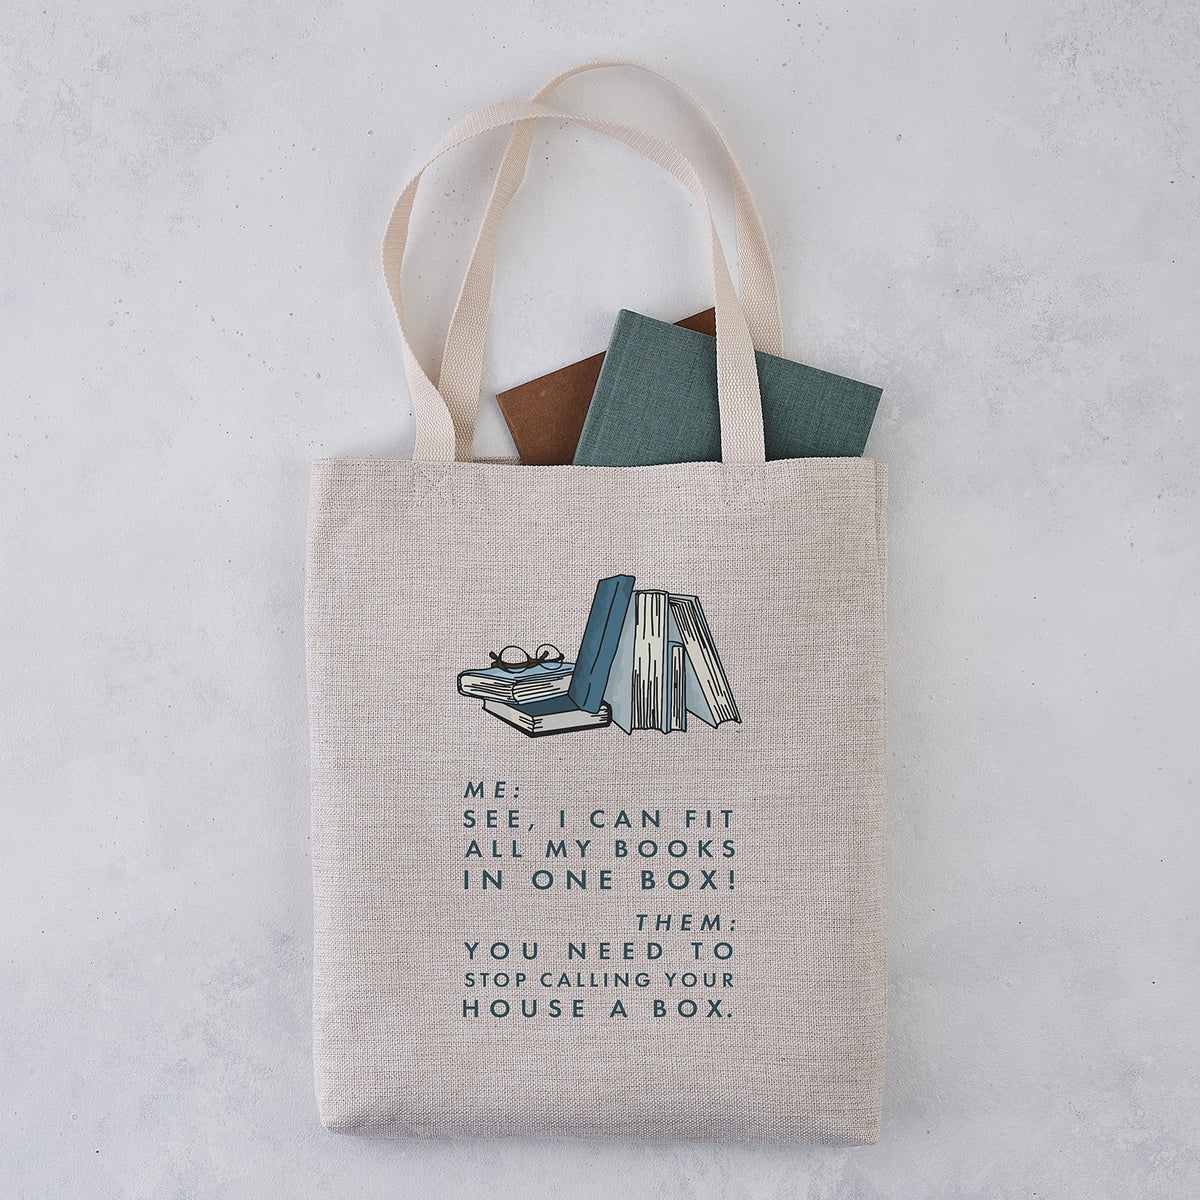 Funny Sayings Canvas Tote Bags - CafePress